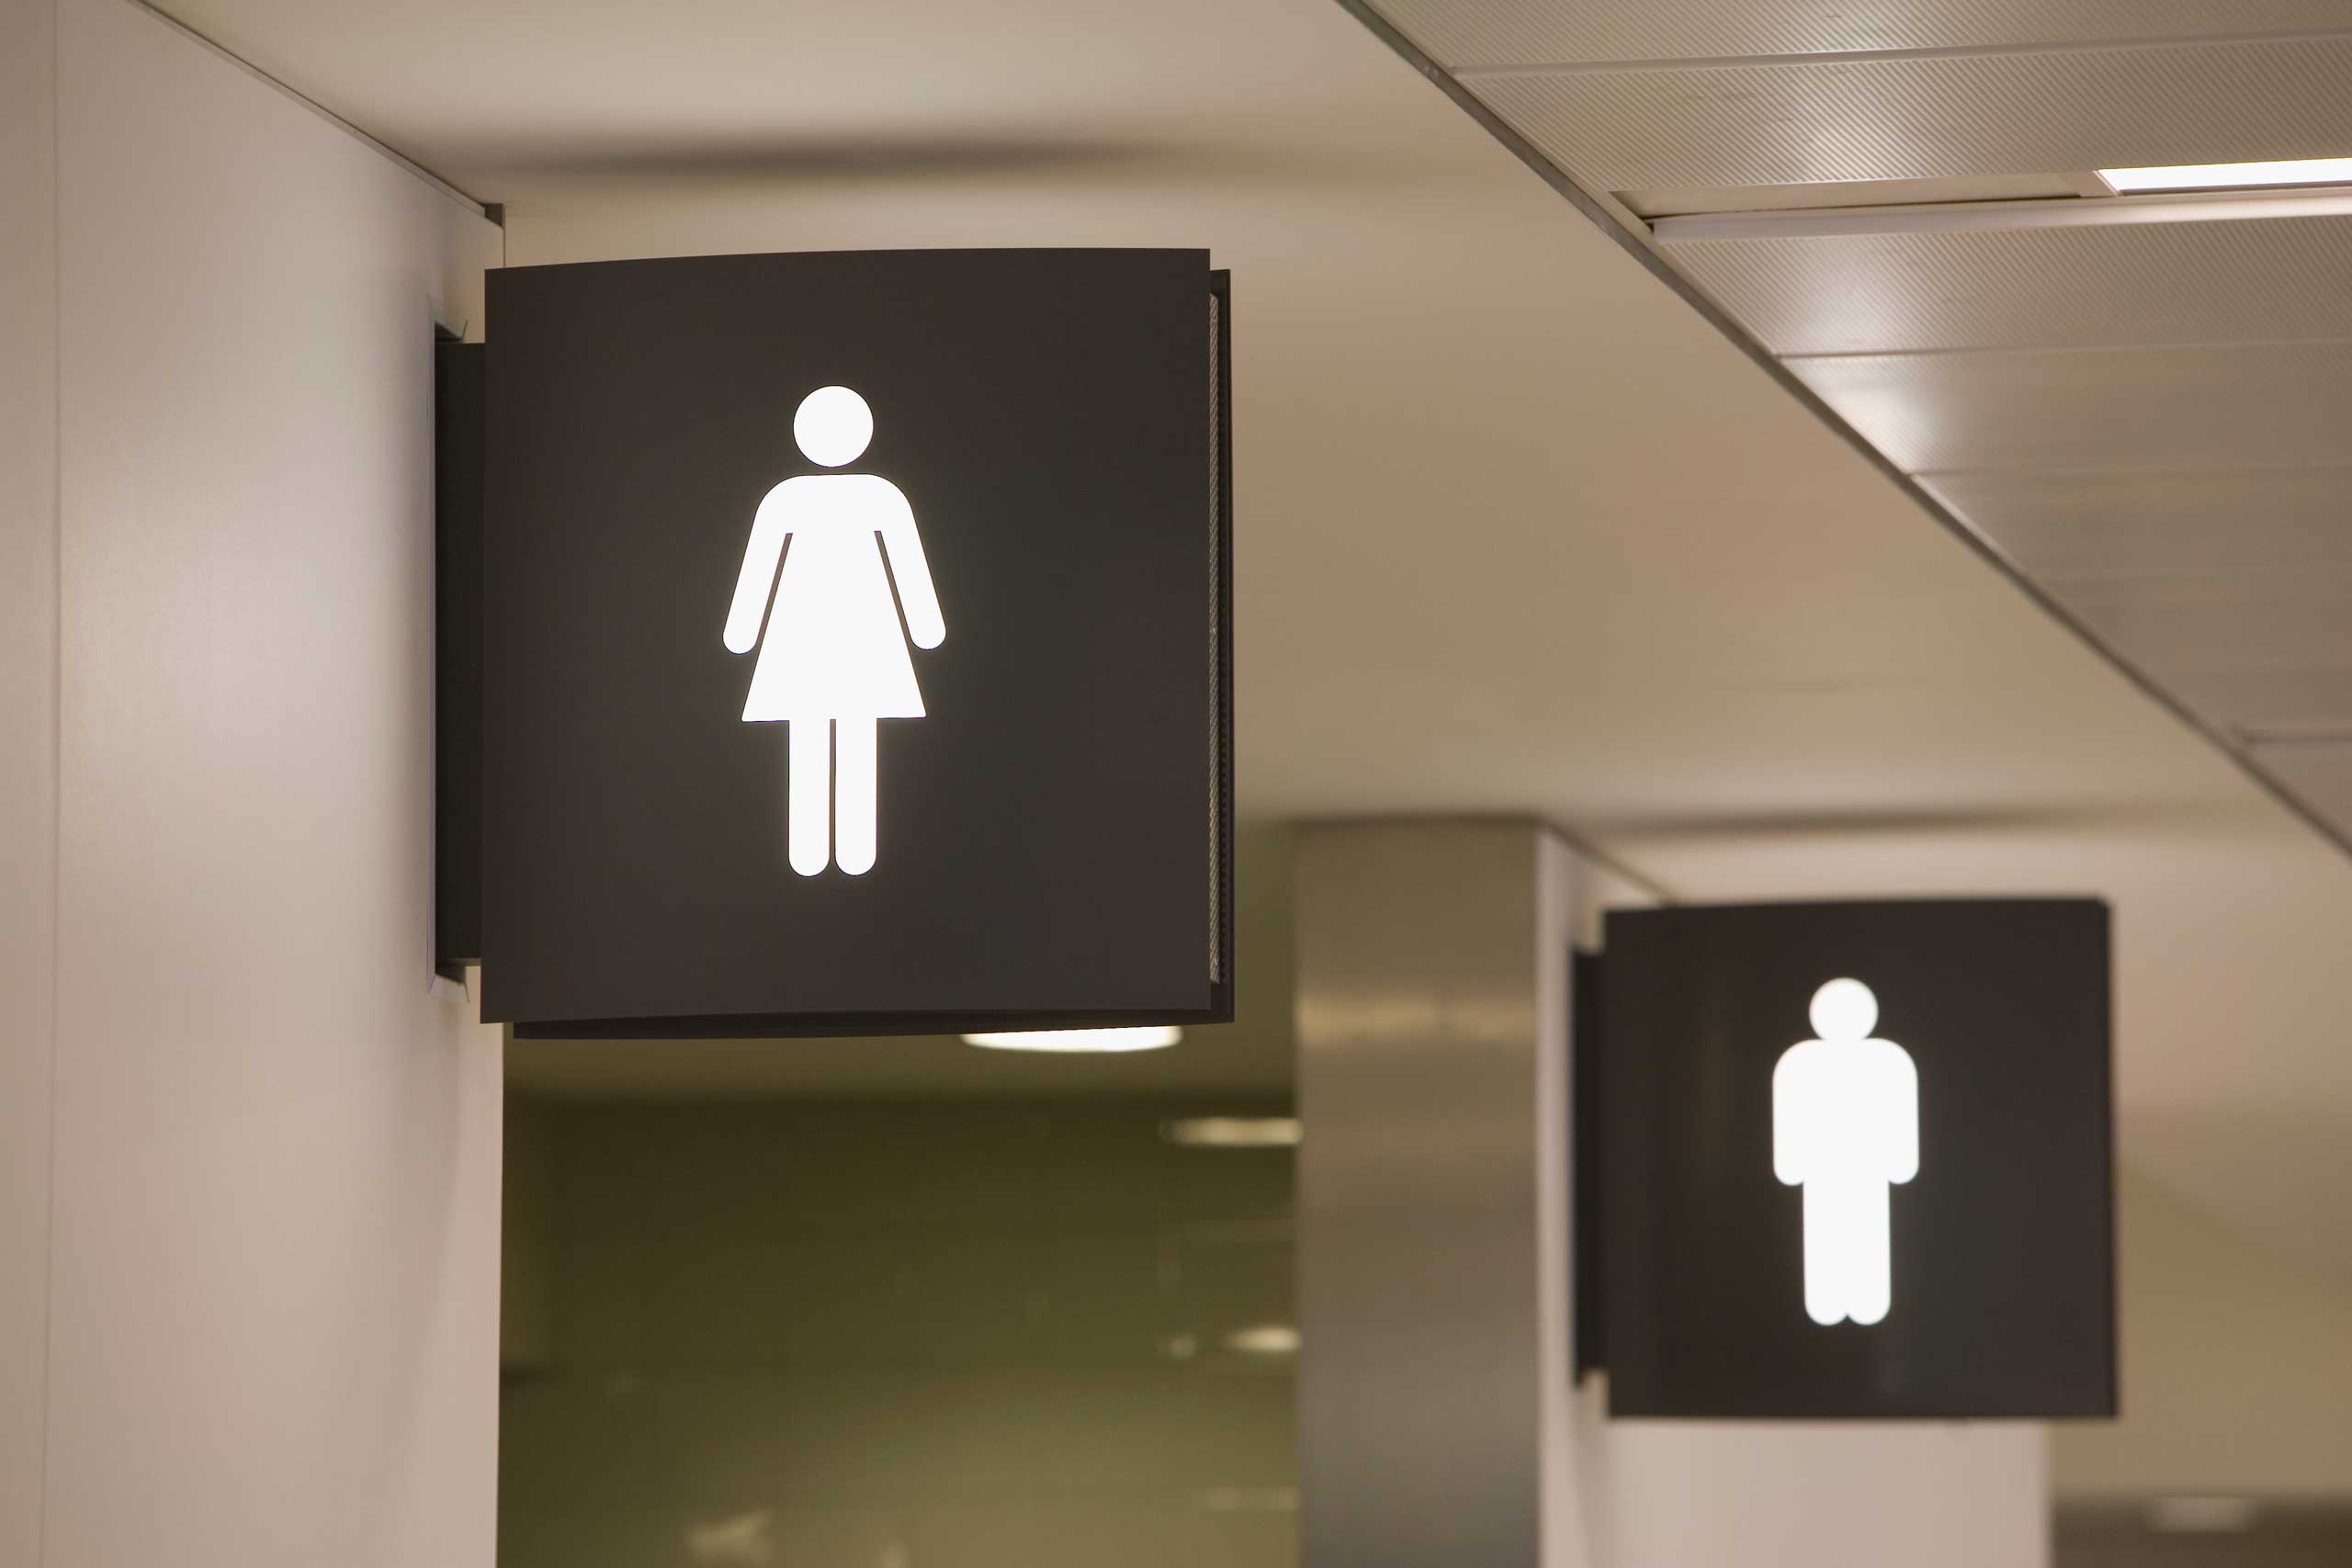 Signs for men's and women's toilets